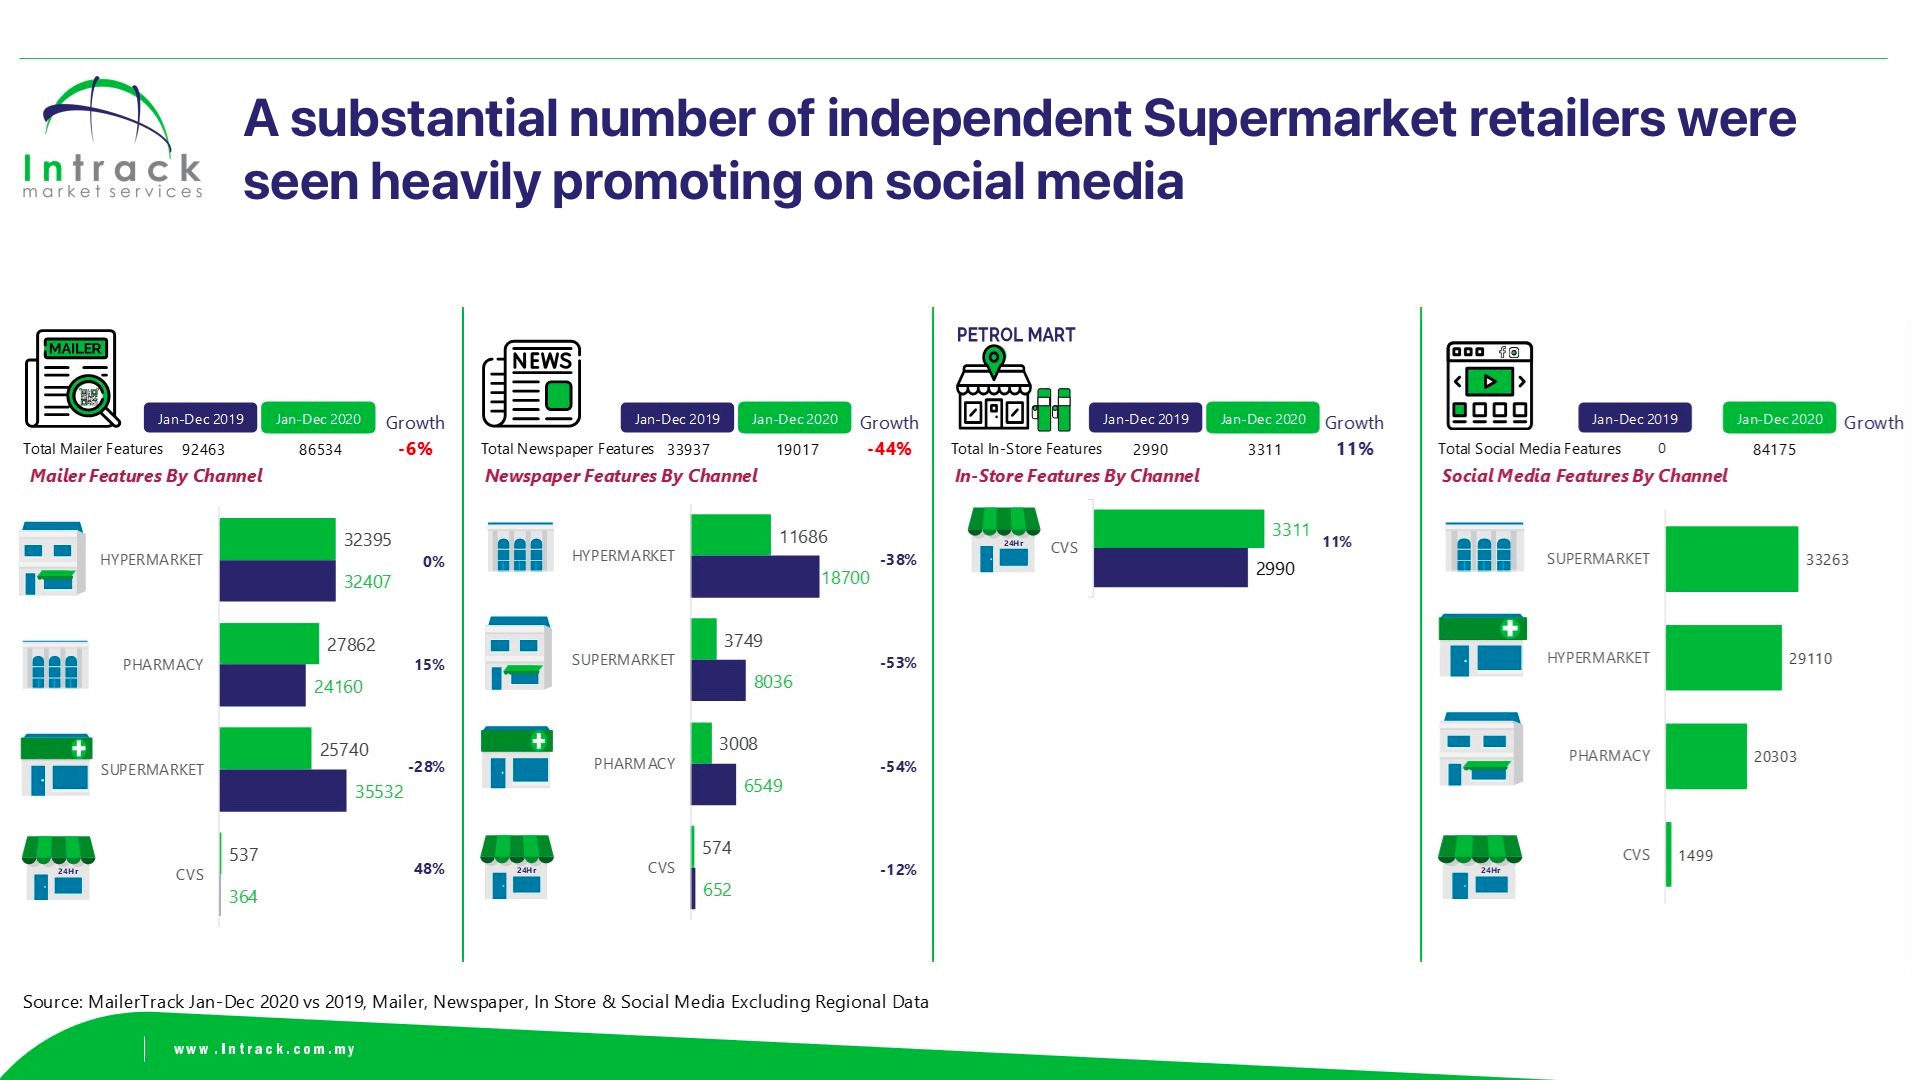 A substantial number of independent Supermarket retailers were seen heavily promoting on social media